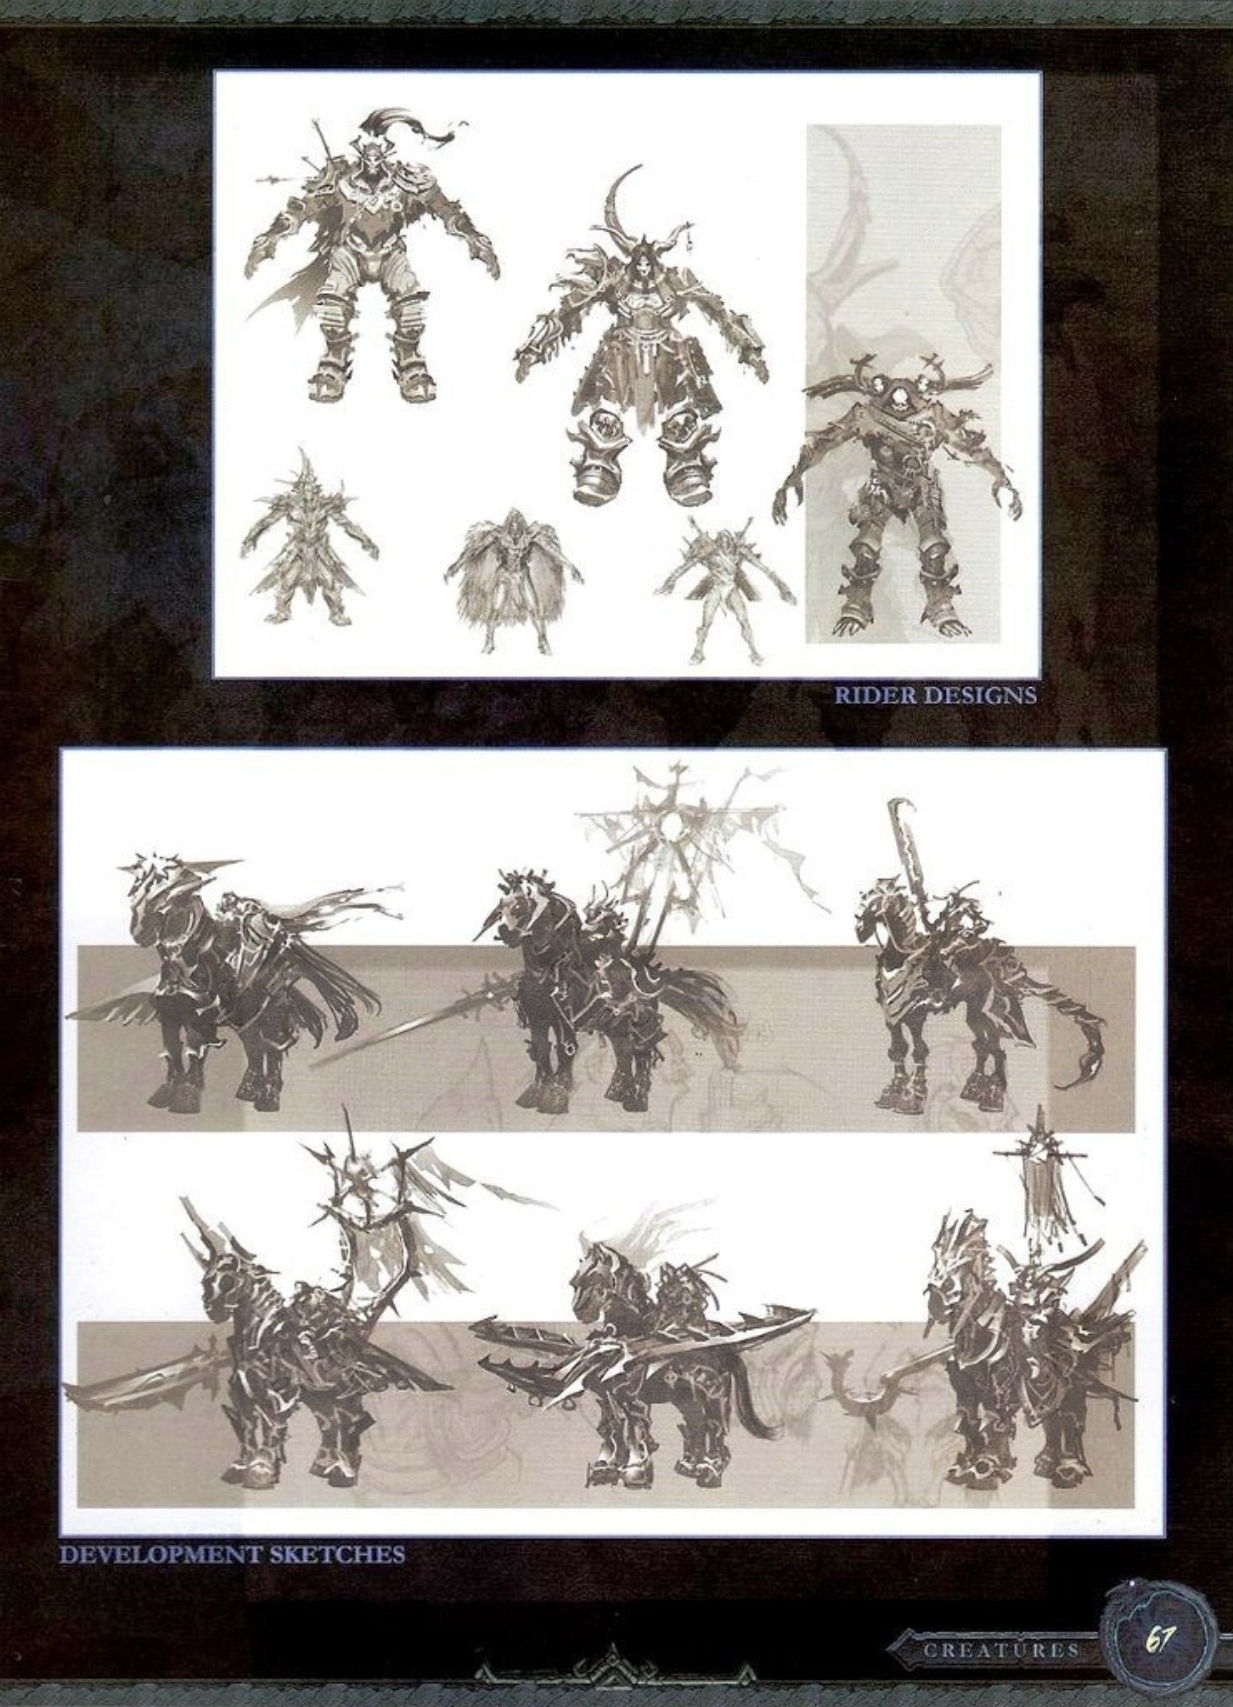 The Art of Darksiders (low-res, missing pages, and watermarked) 66